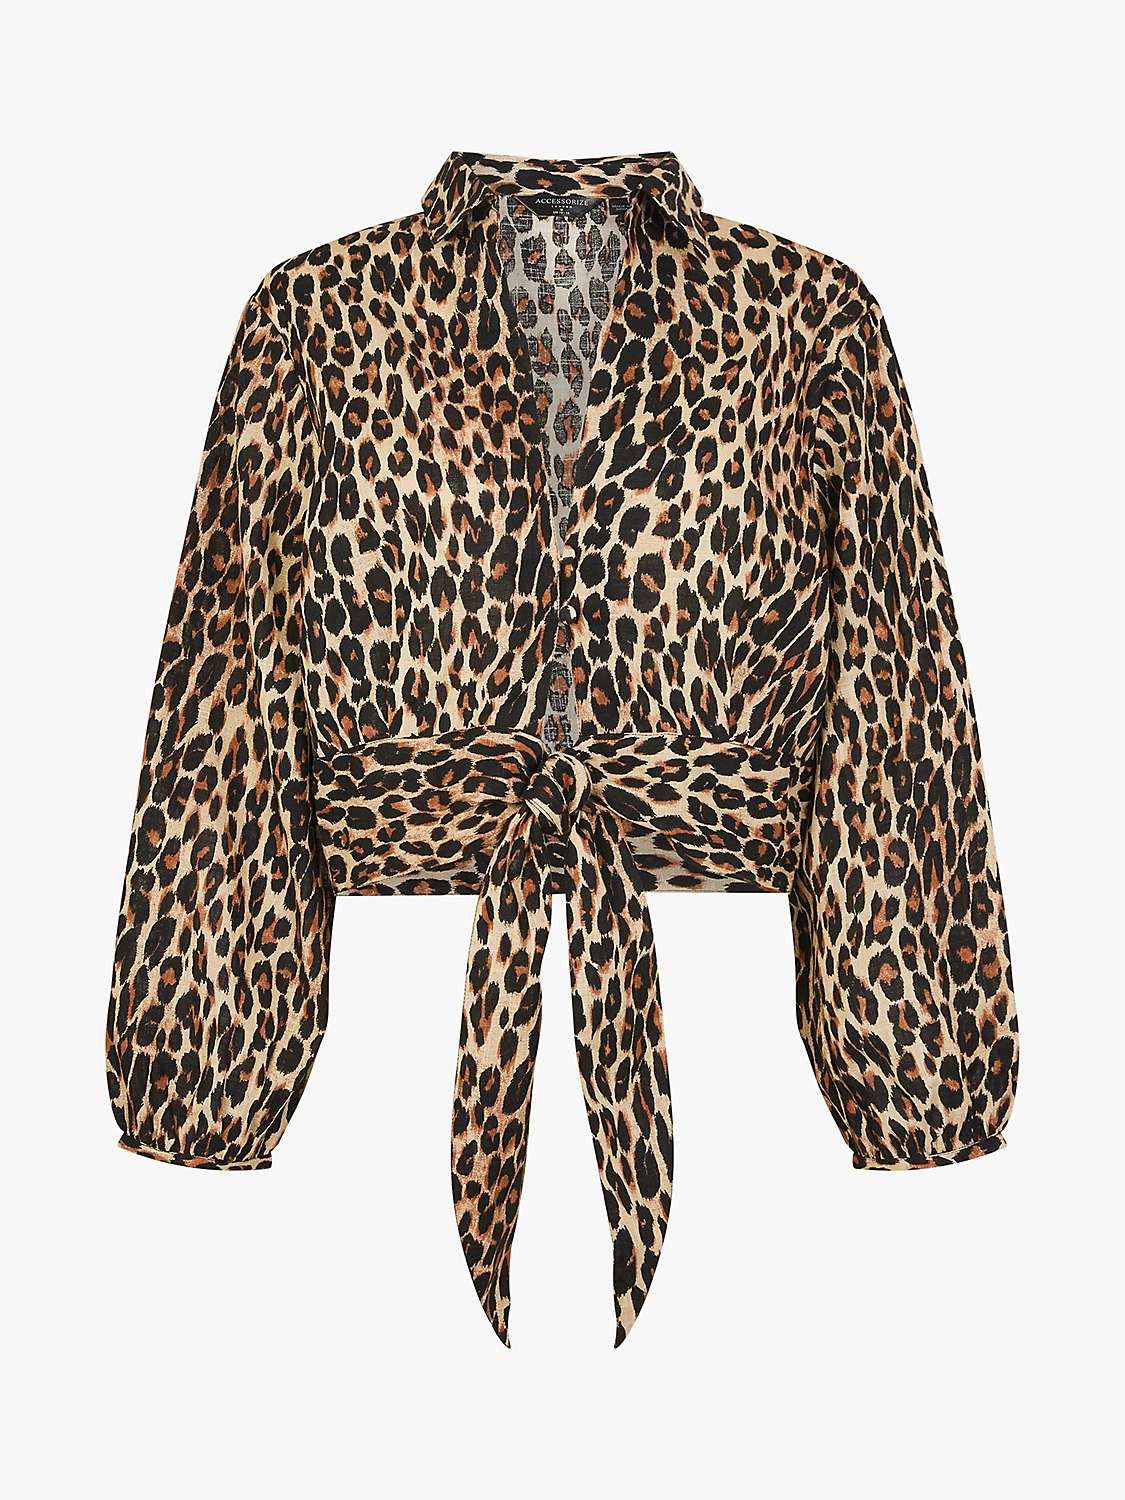 Buy Accessorize Leopard Tie Front Blouse, Mid Brown Online at johnlewis.com